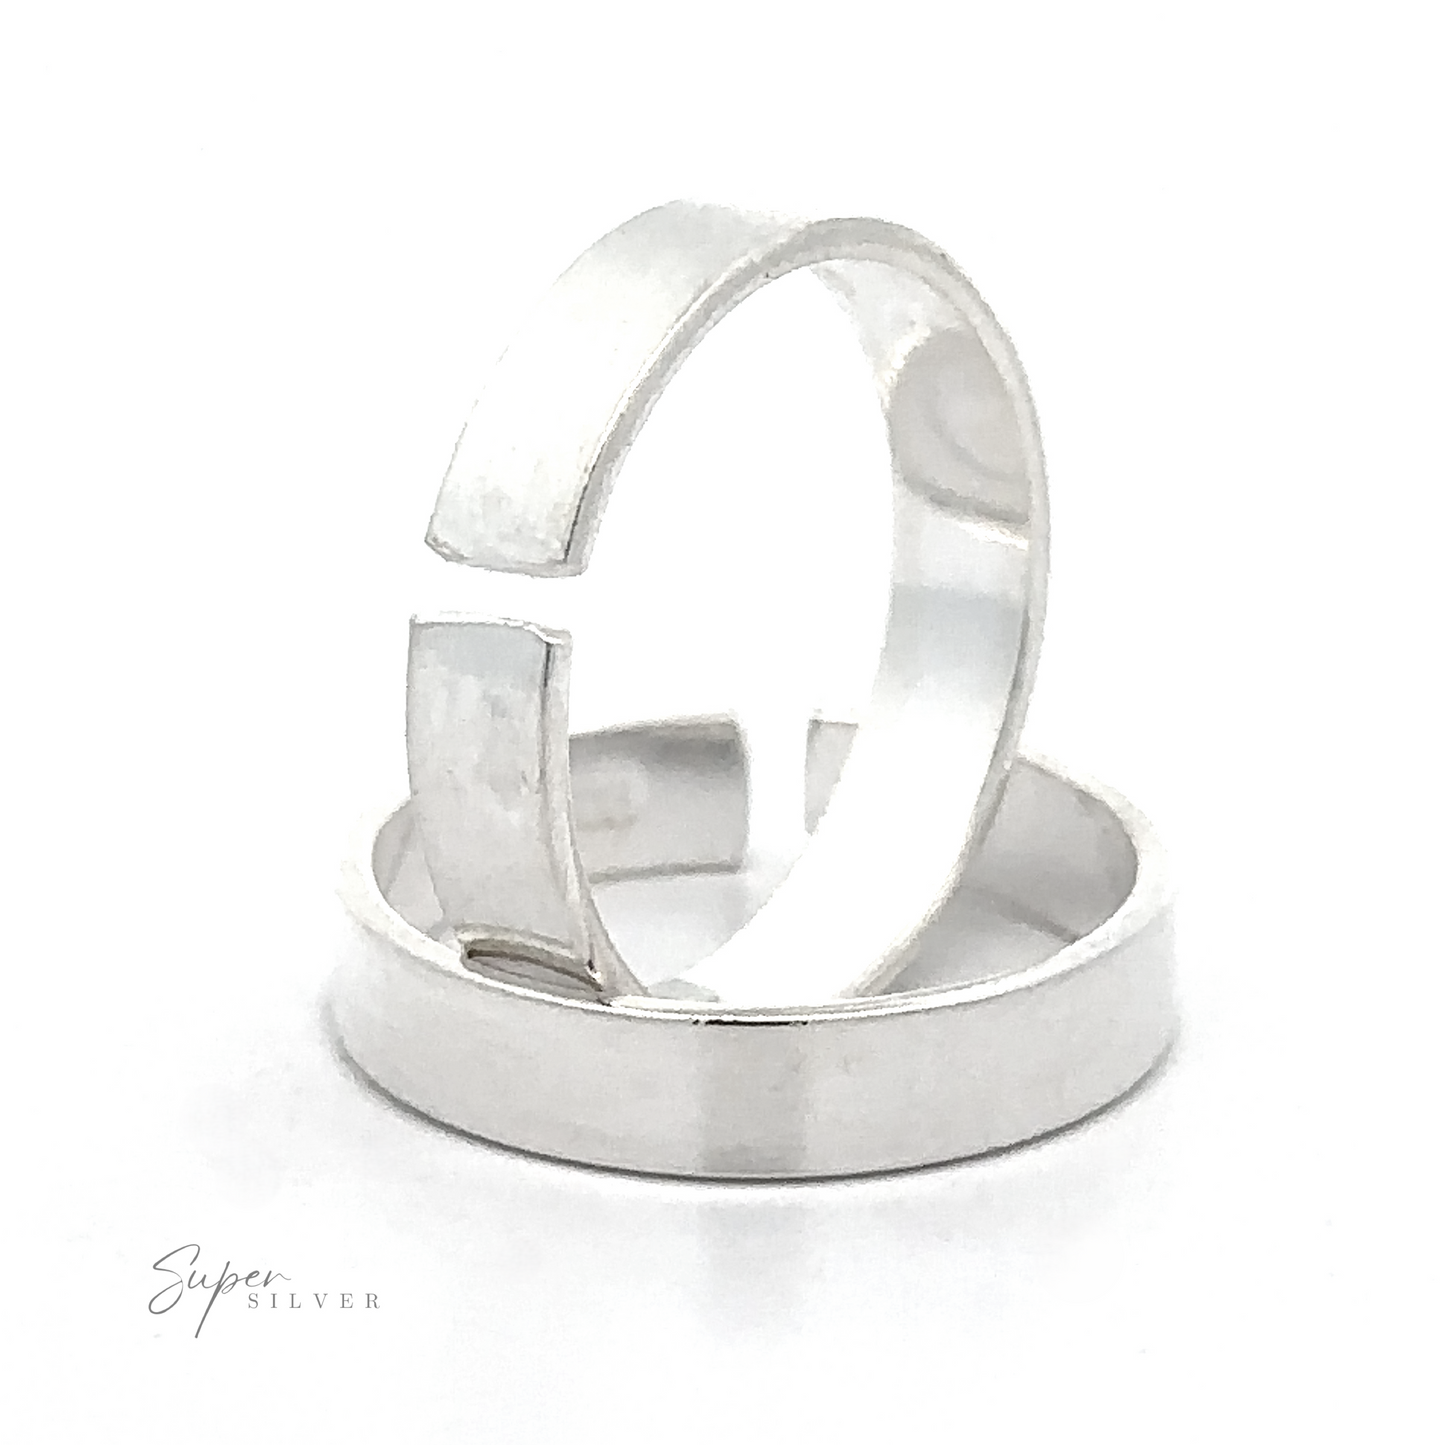 Square Band Adjustable Toe Ring crafted from .925 Sterling Silver with a geometric cut-out pattern, displayed against a white background.